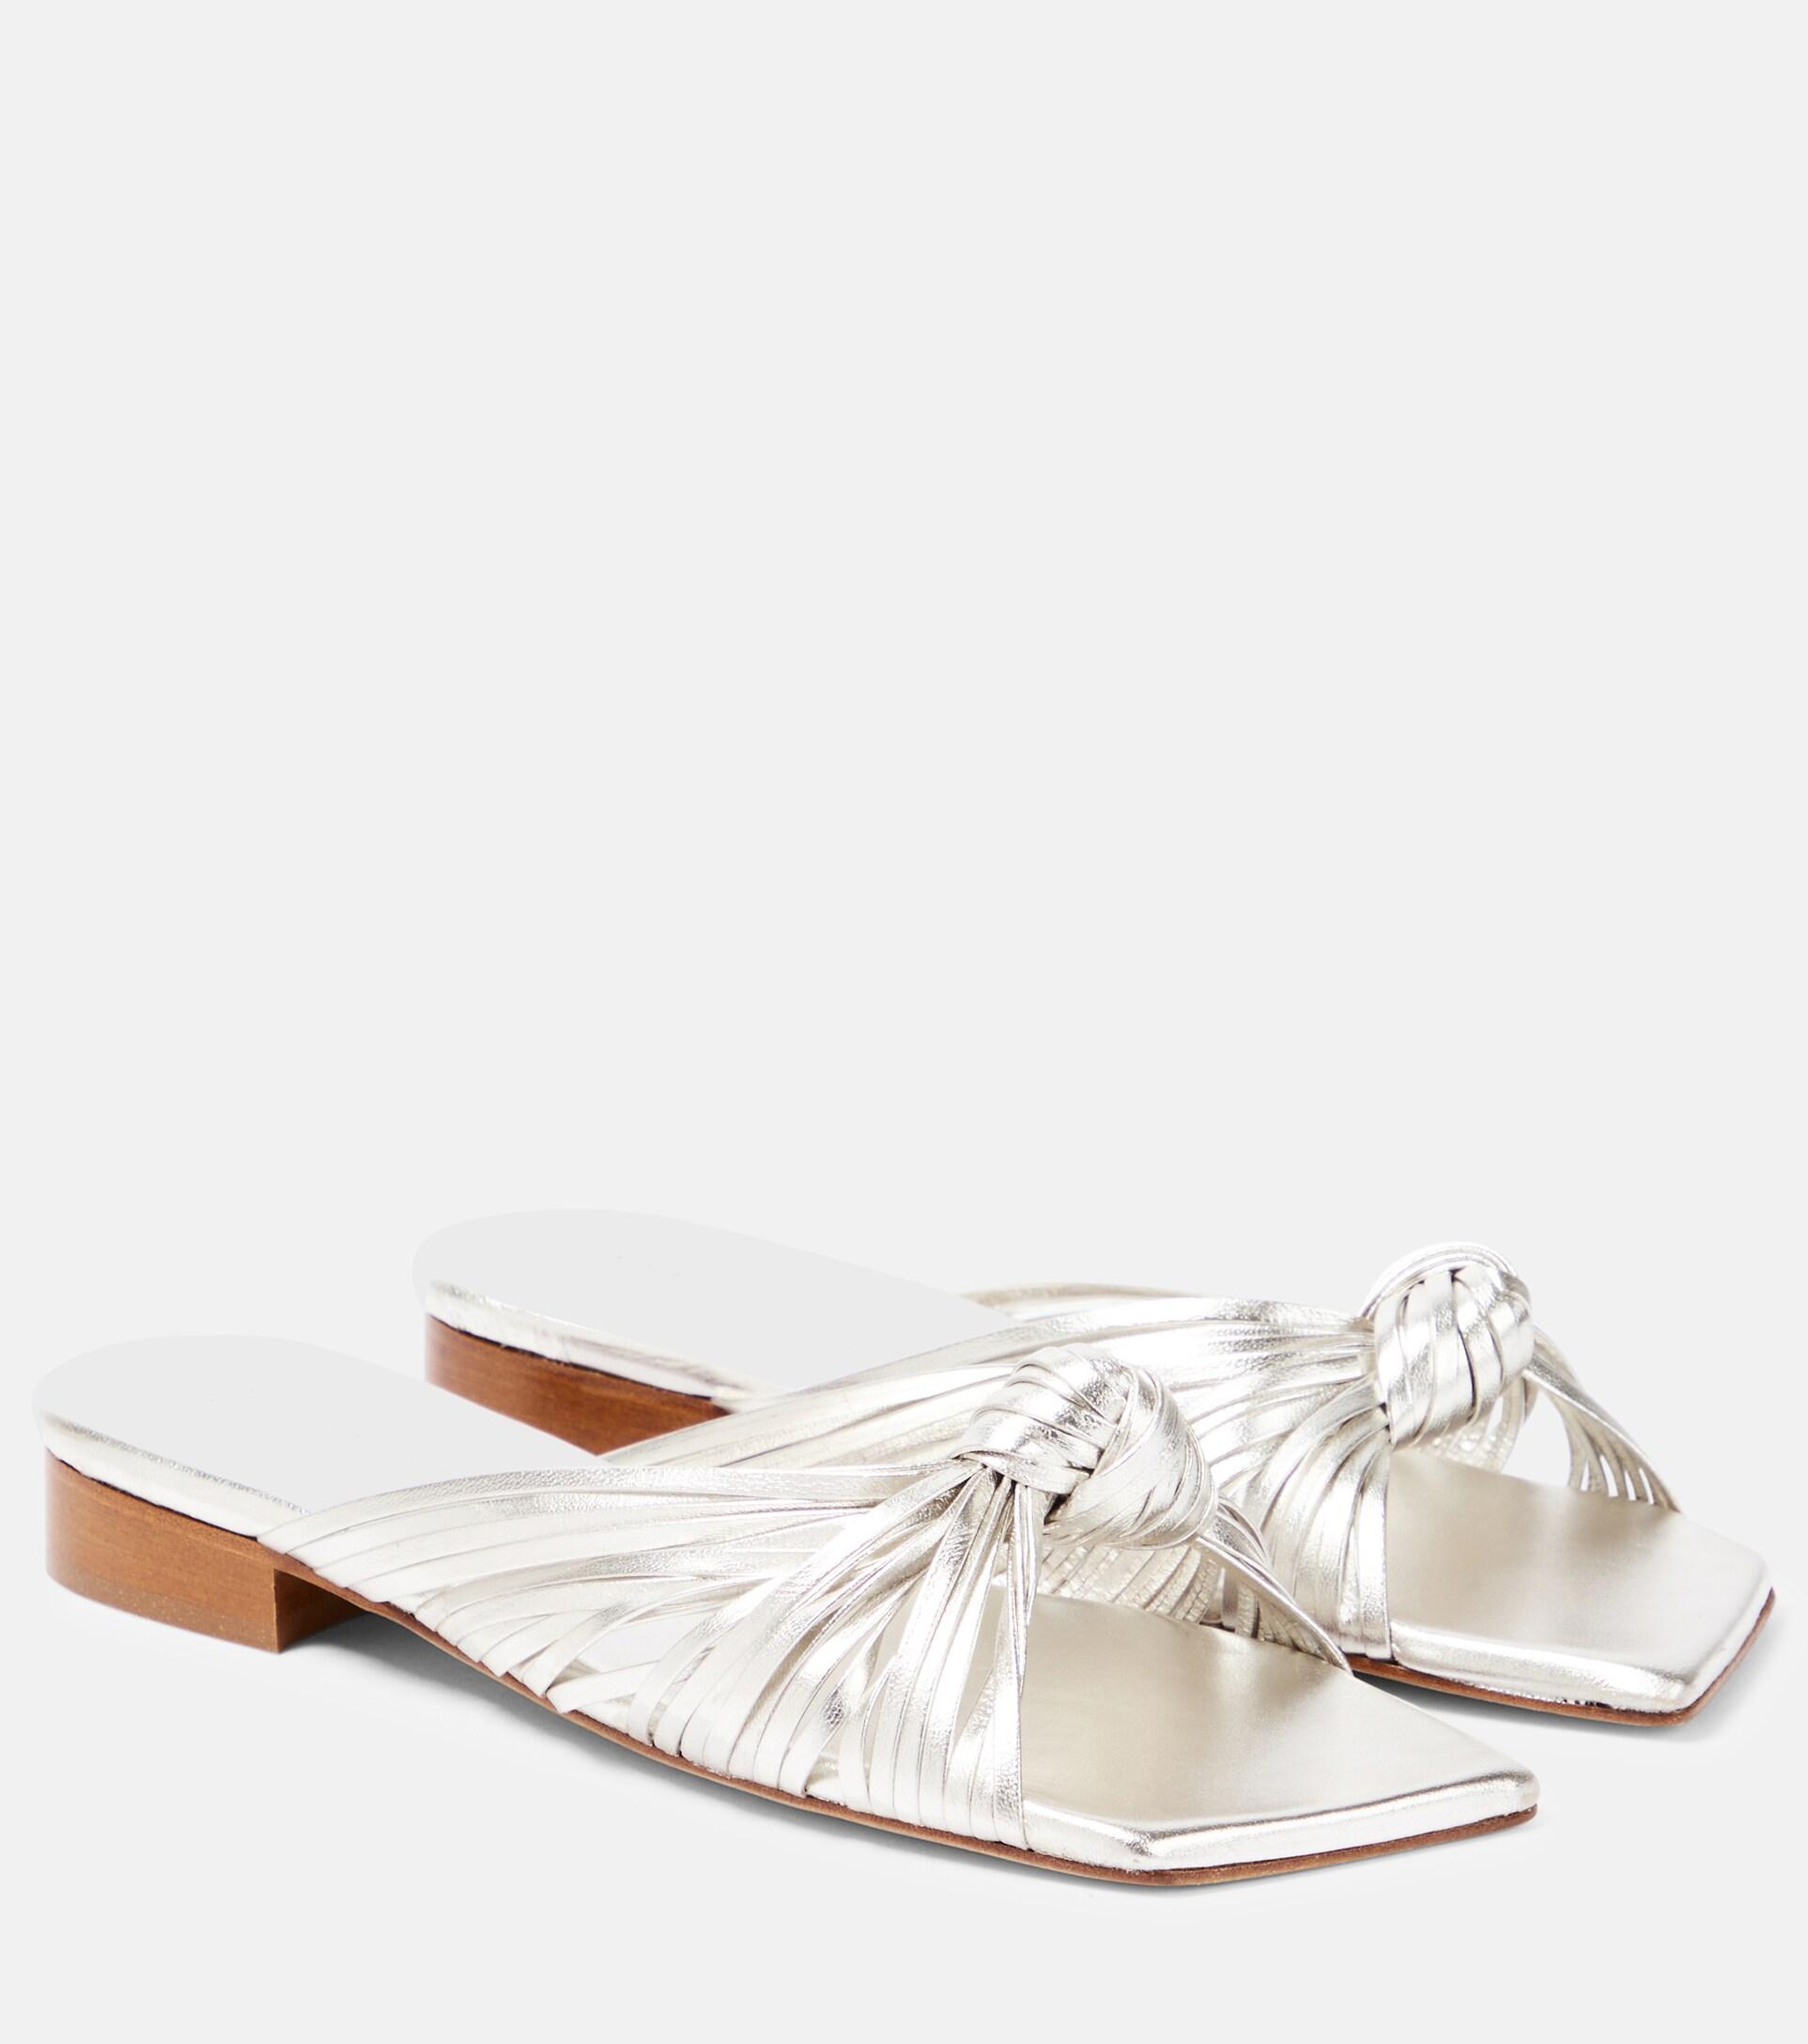 Souliers Martinez Feston Leather Sandals in White | Lyst